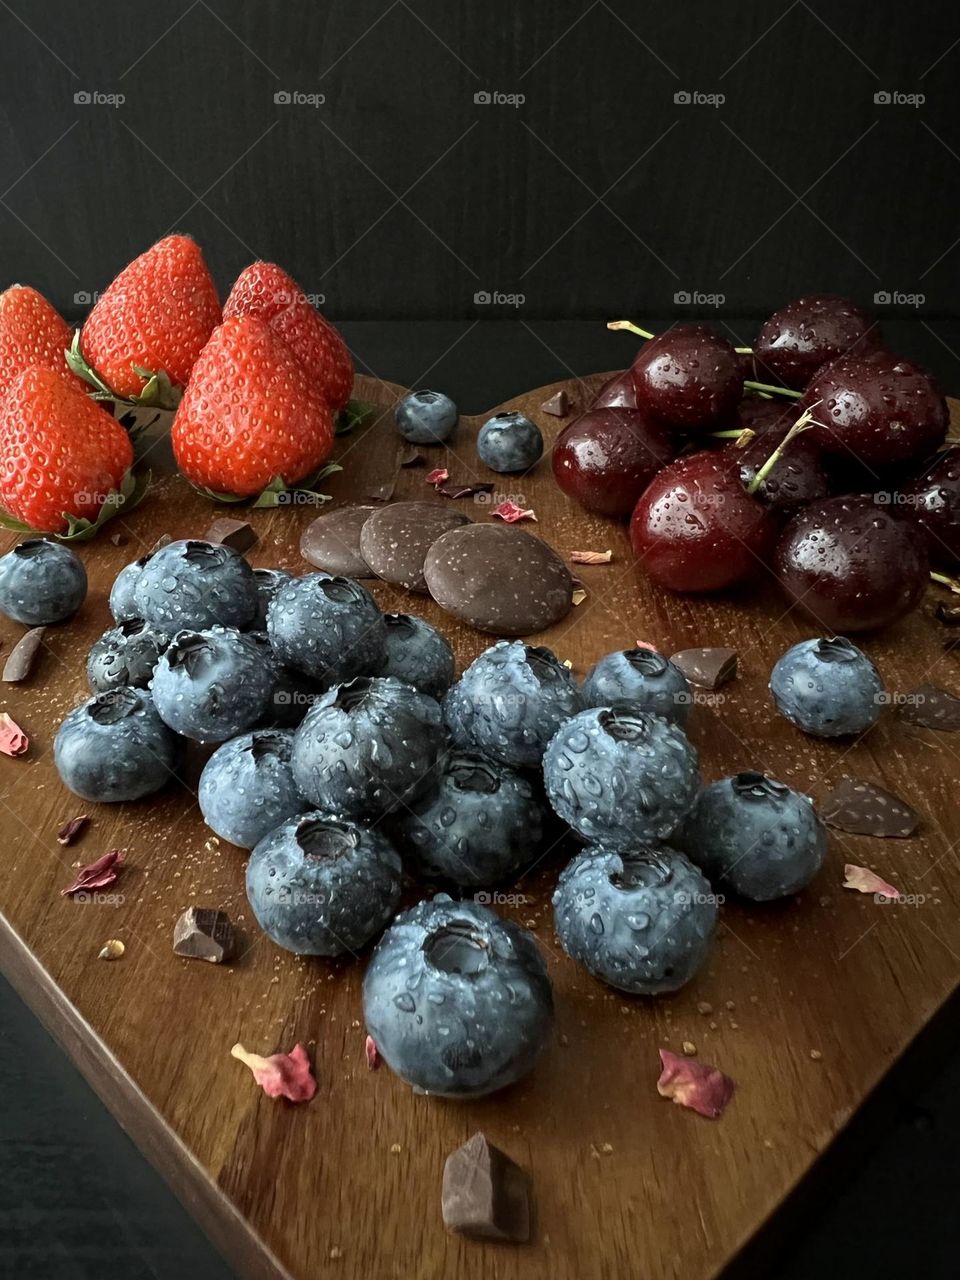 Summer treats, summer snacks, delicious summer berries: strawberry, cherry and blueberry.